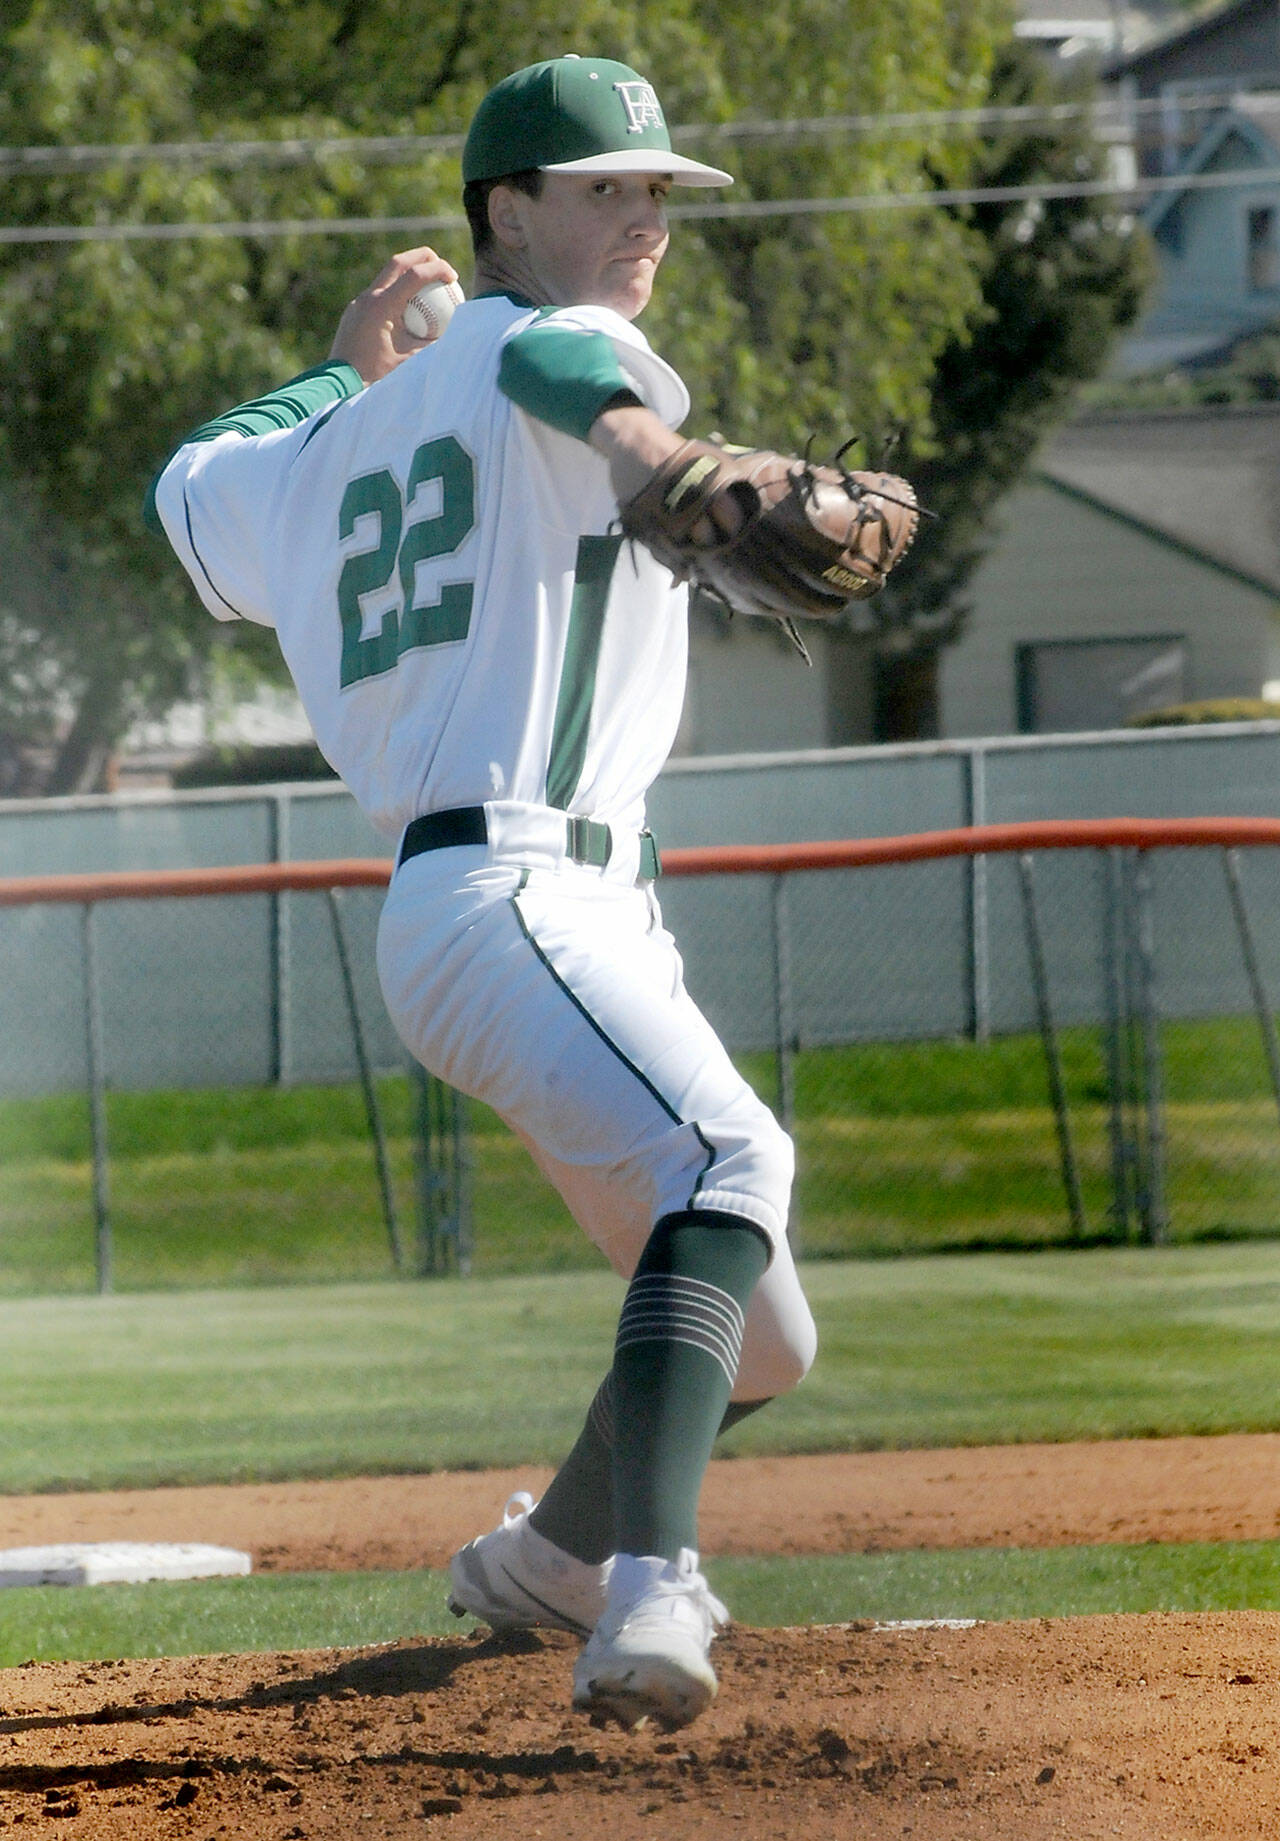 KEITH THORPE/PENINSULA DAILY NEWS Port Angeles’ pitcher Rylan Politika throws in the first inning against Franklin Pierce on Wednesday at Port Angeles Civic Field.